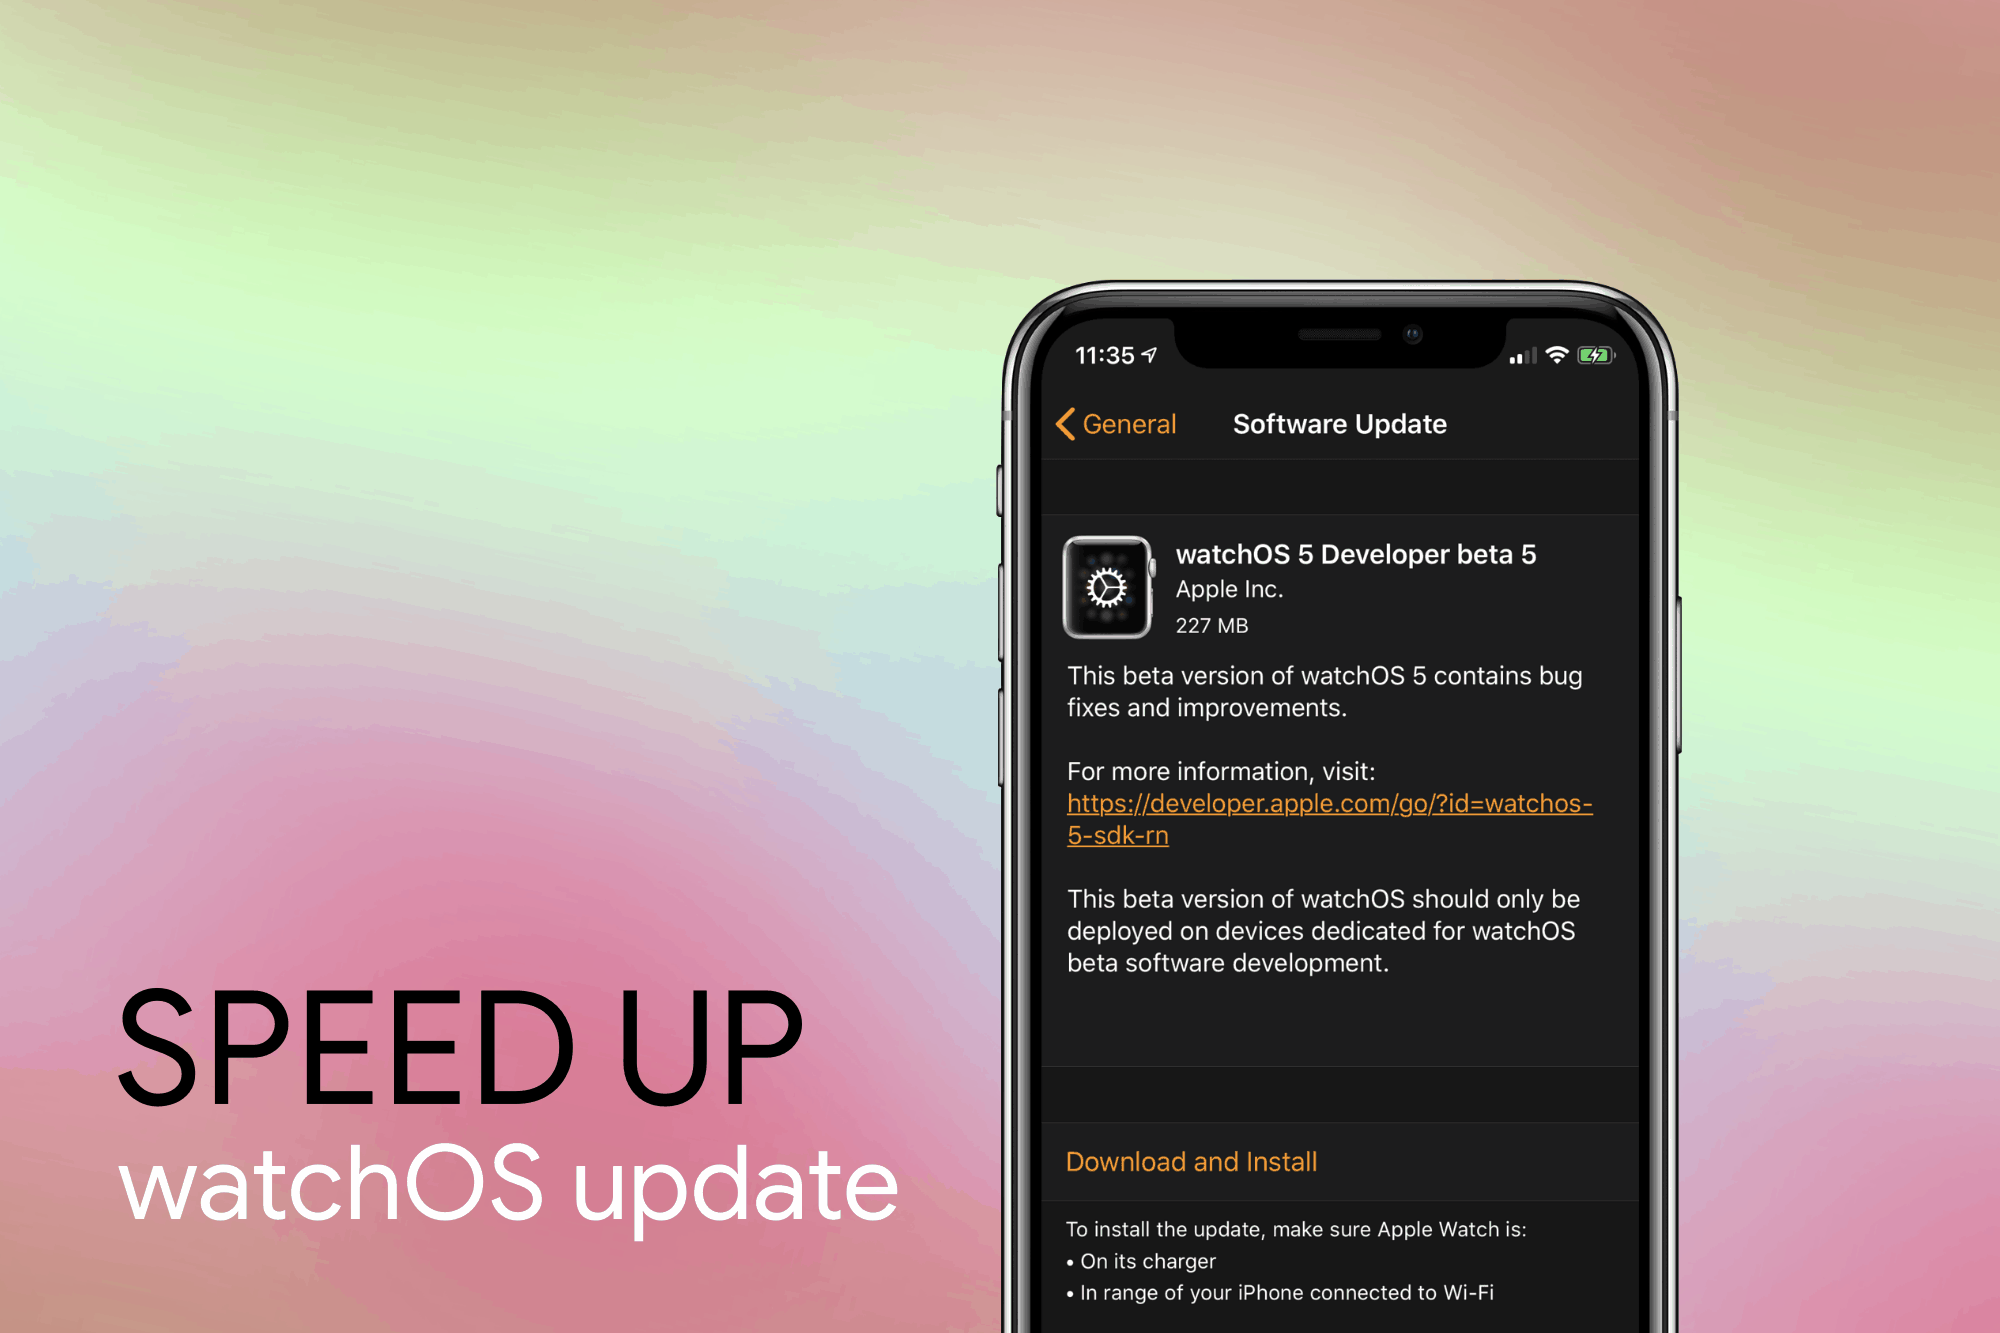 how to update watchOS faster